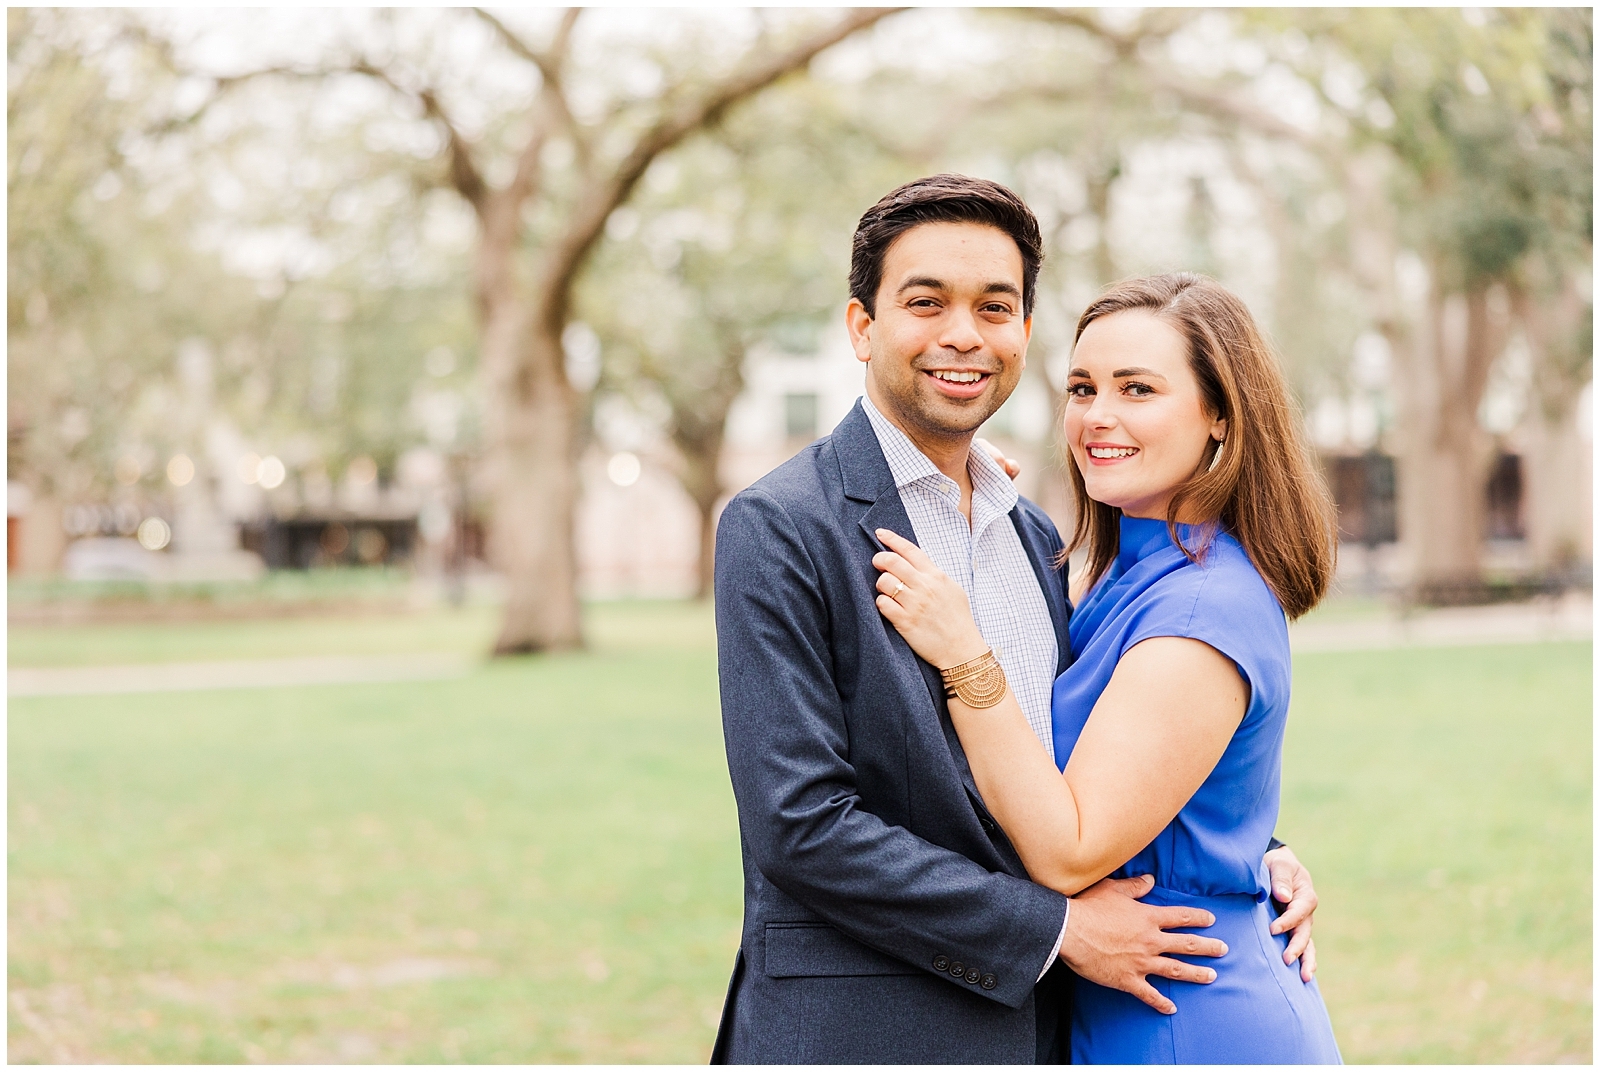 history museum of mobile alabama downtown engagement session jennie tewell 0016 1